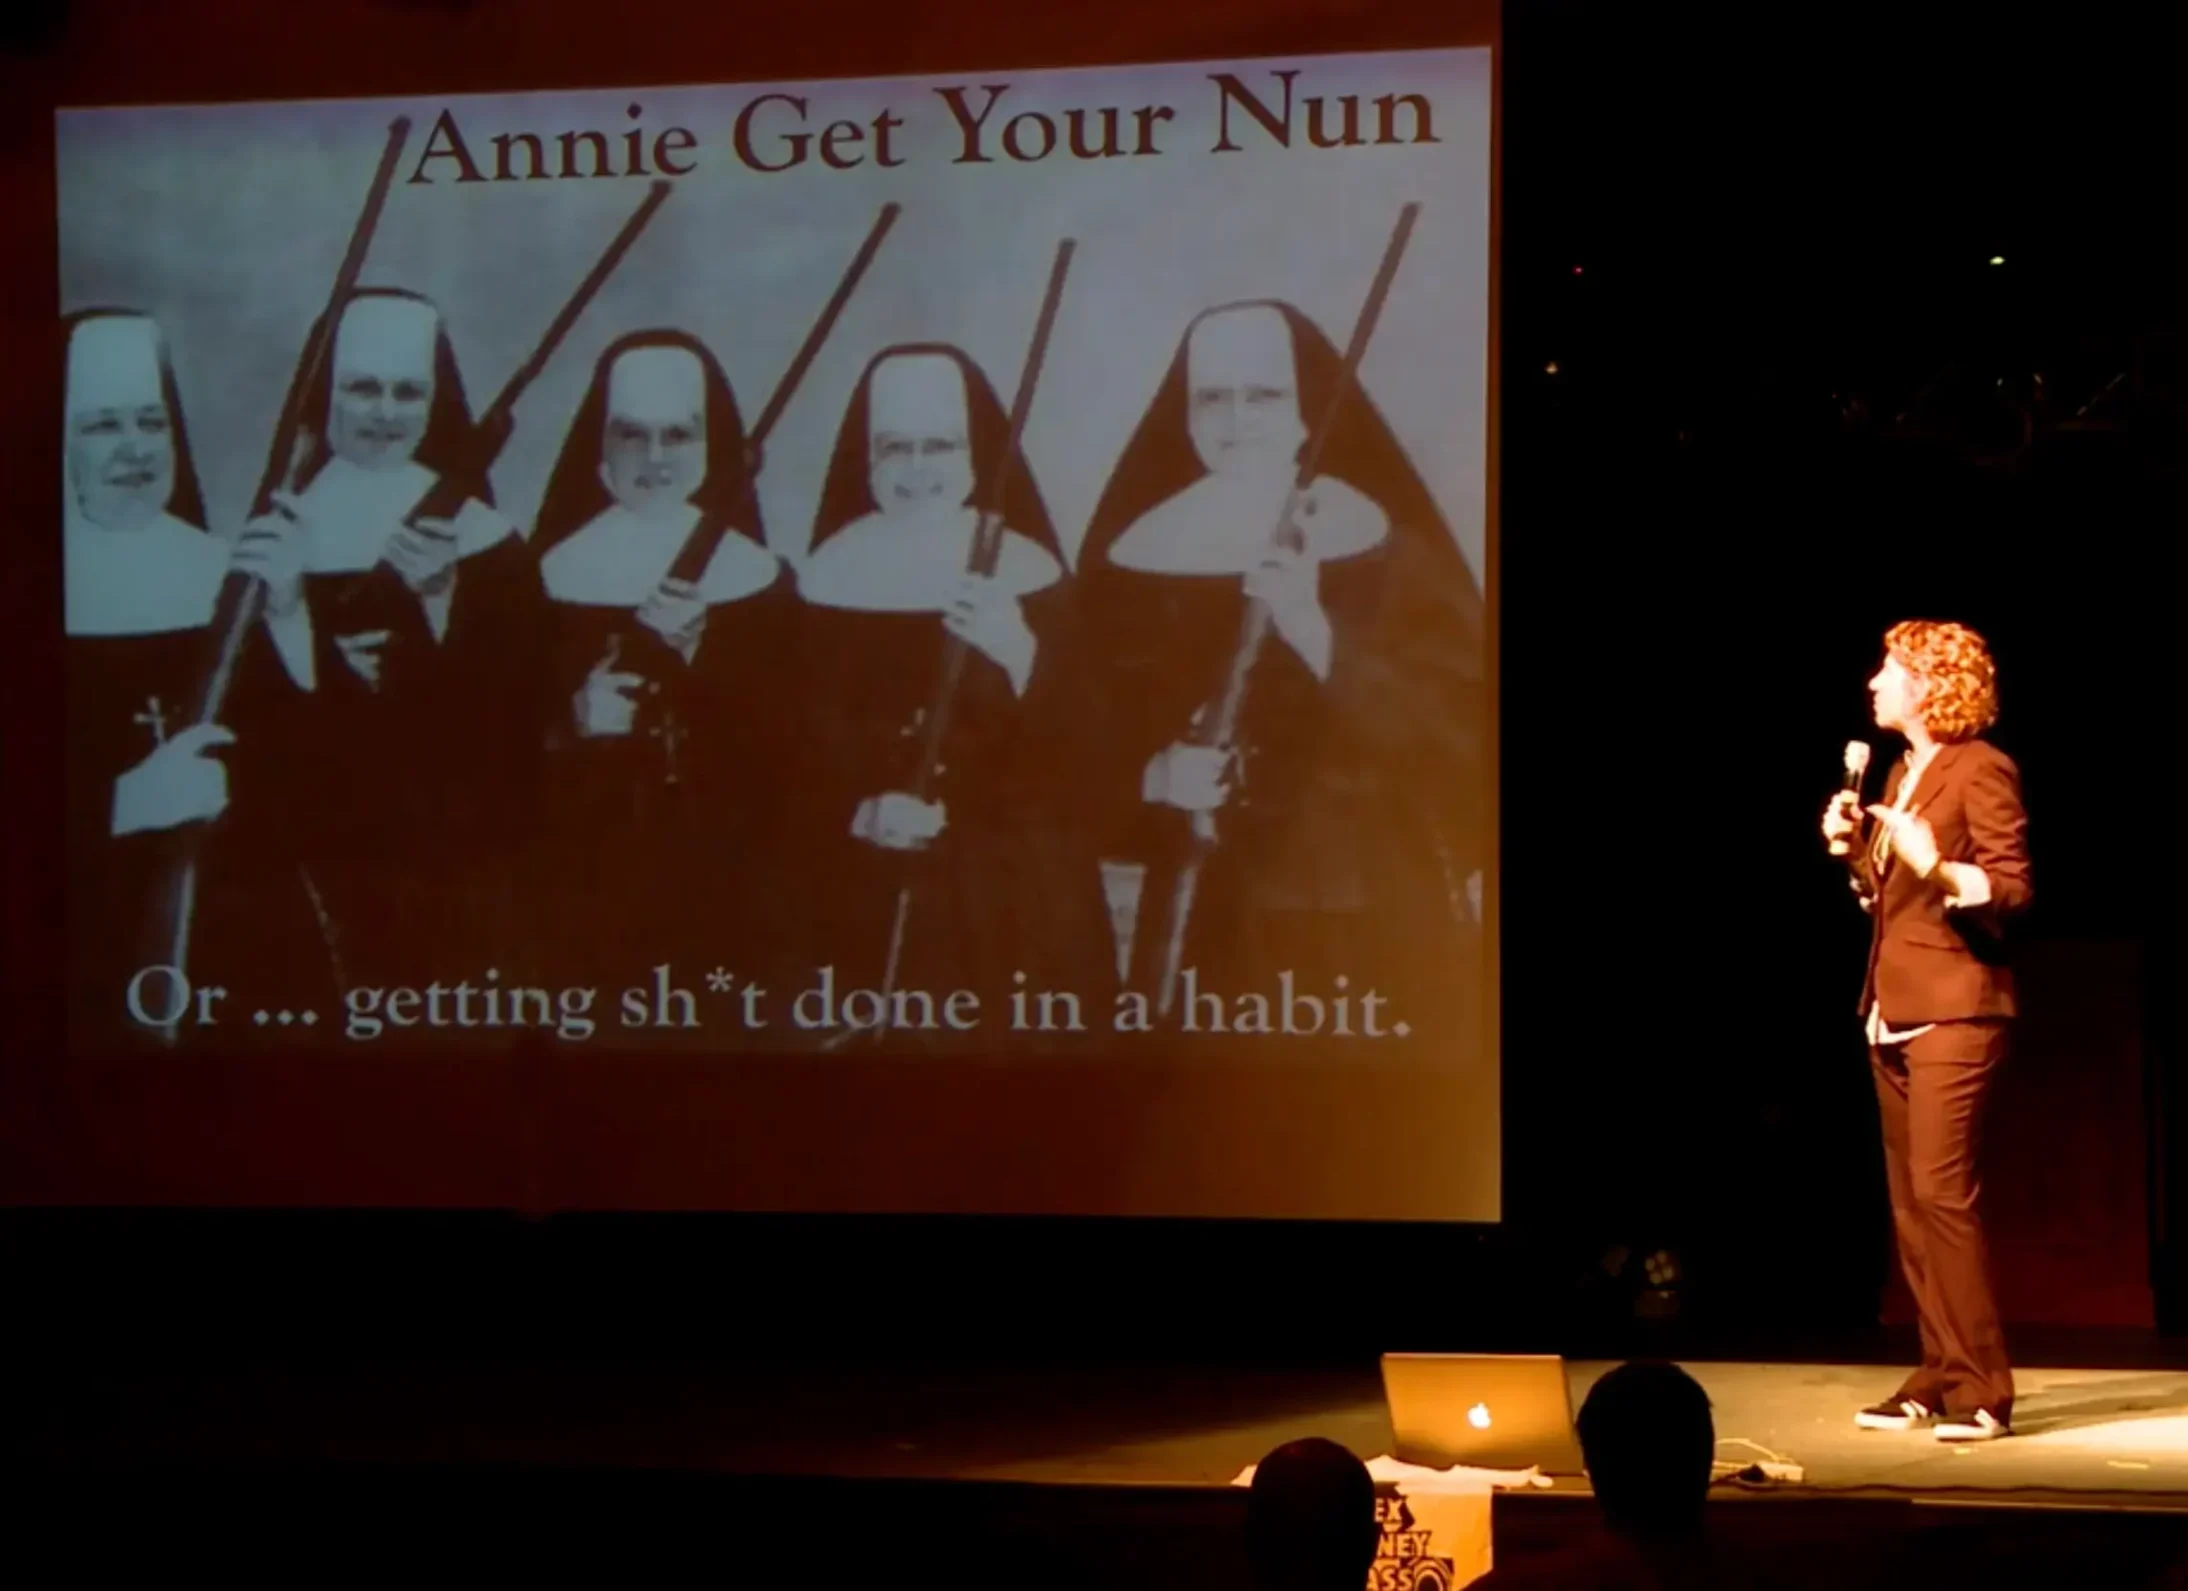 Michele Stowe of Skyrocket Coaching speaking on stage "Annie Get Your Nun"